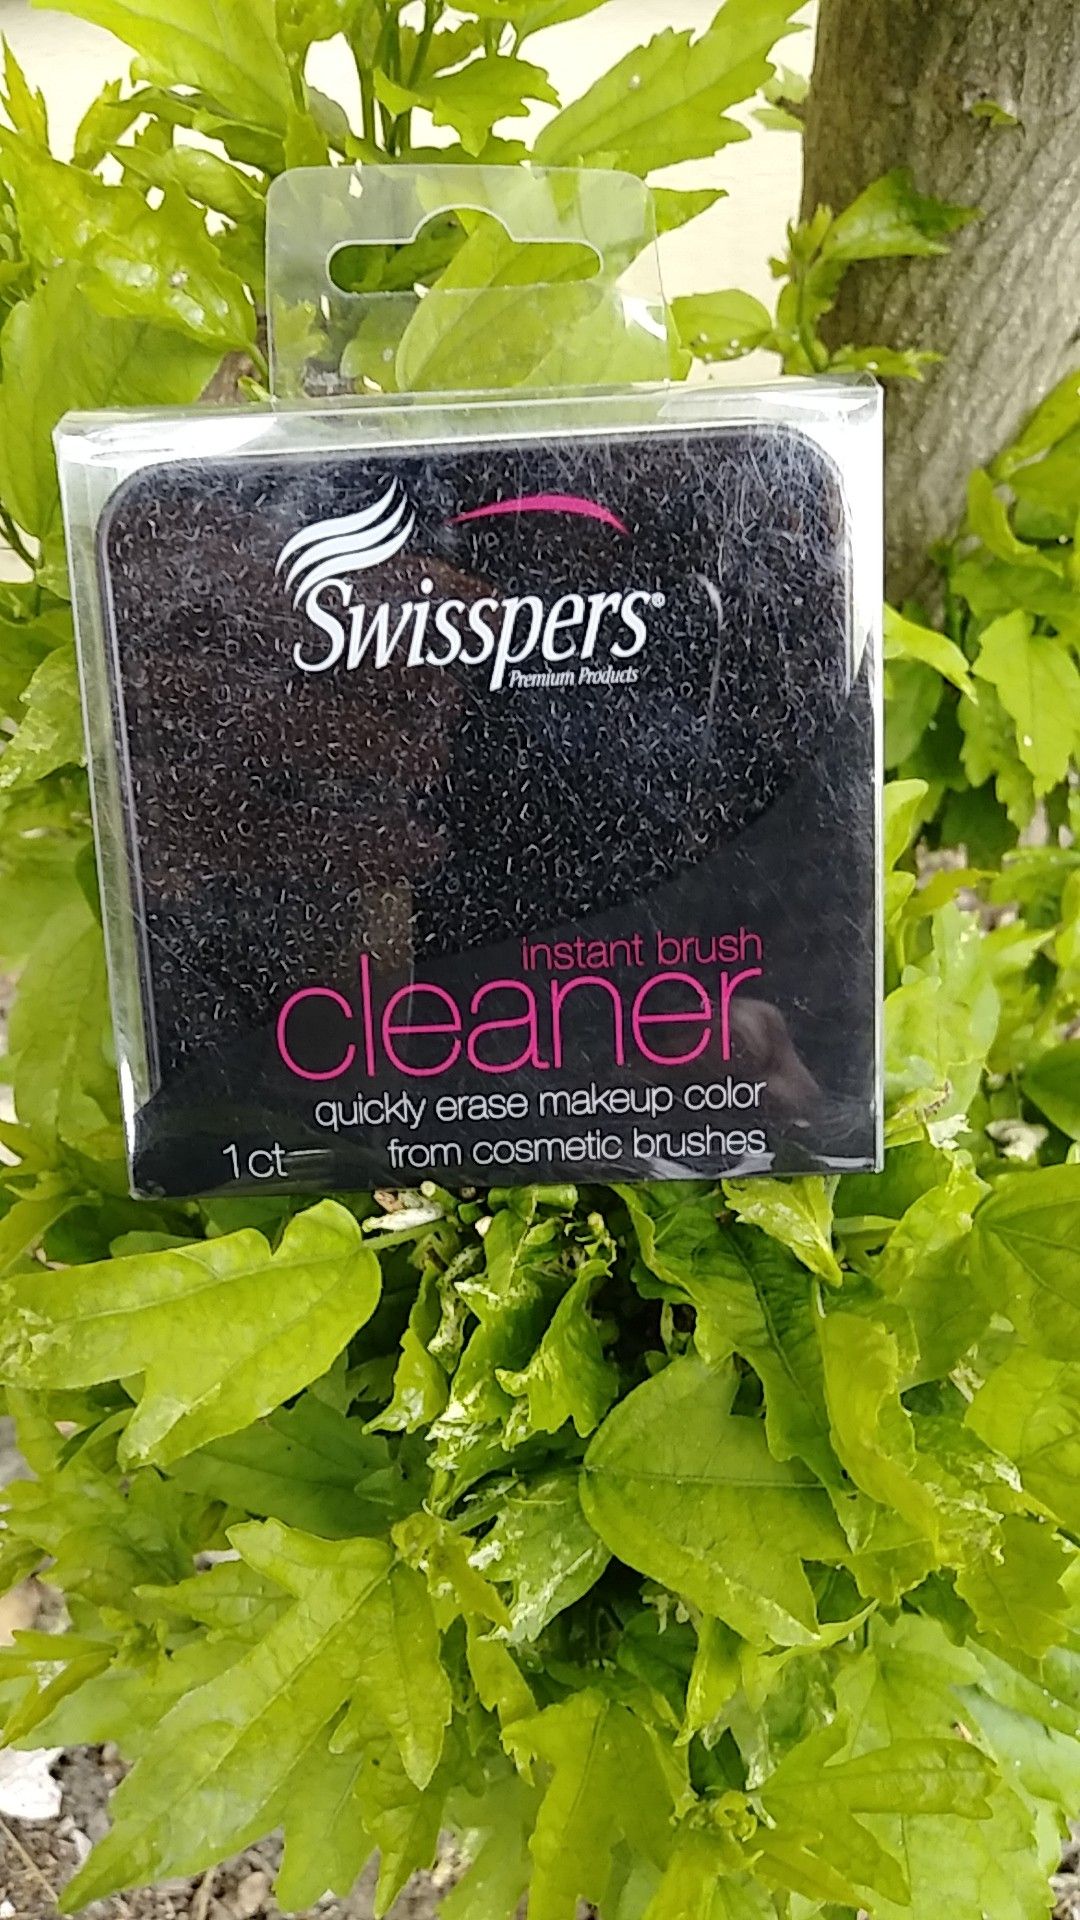 Swisspers Cleaner...quick erase makeup color from cosmetic brushes...1 ct